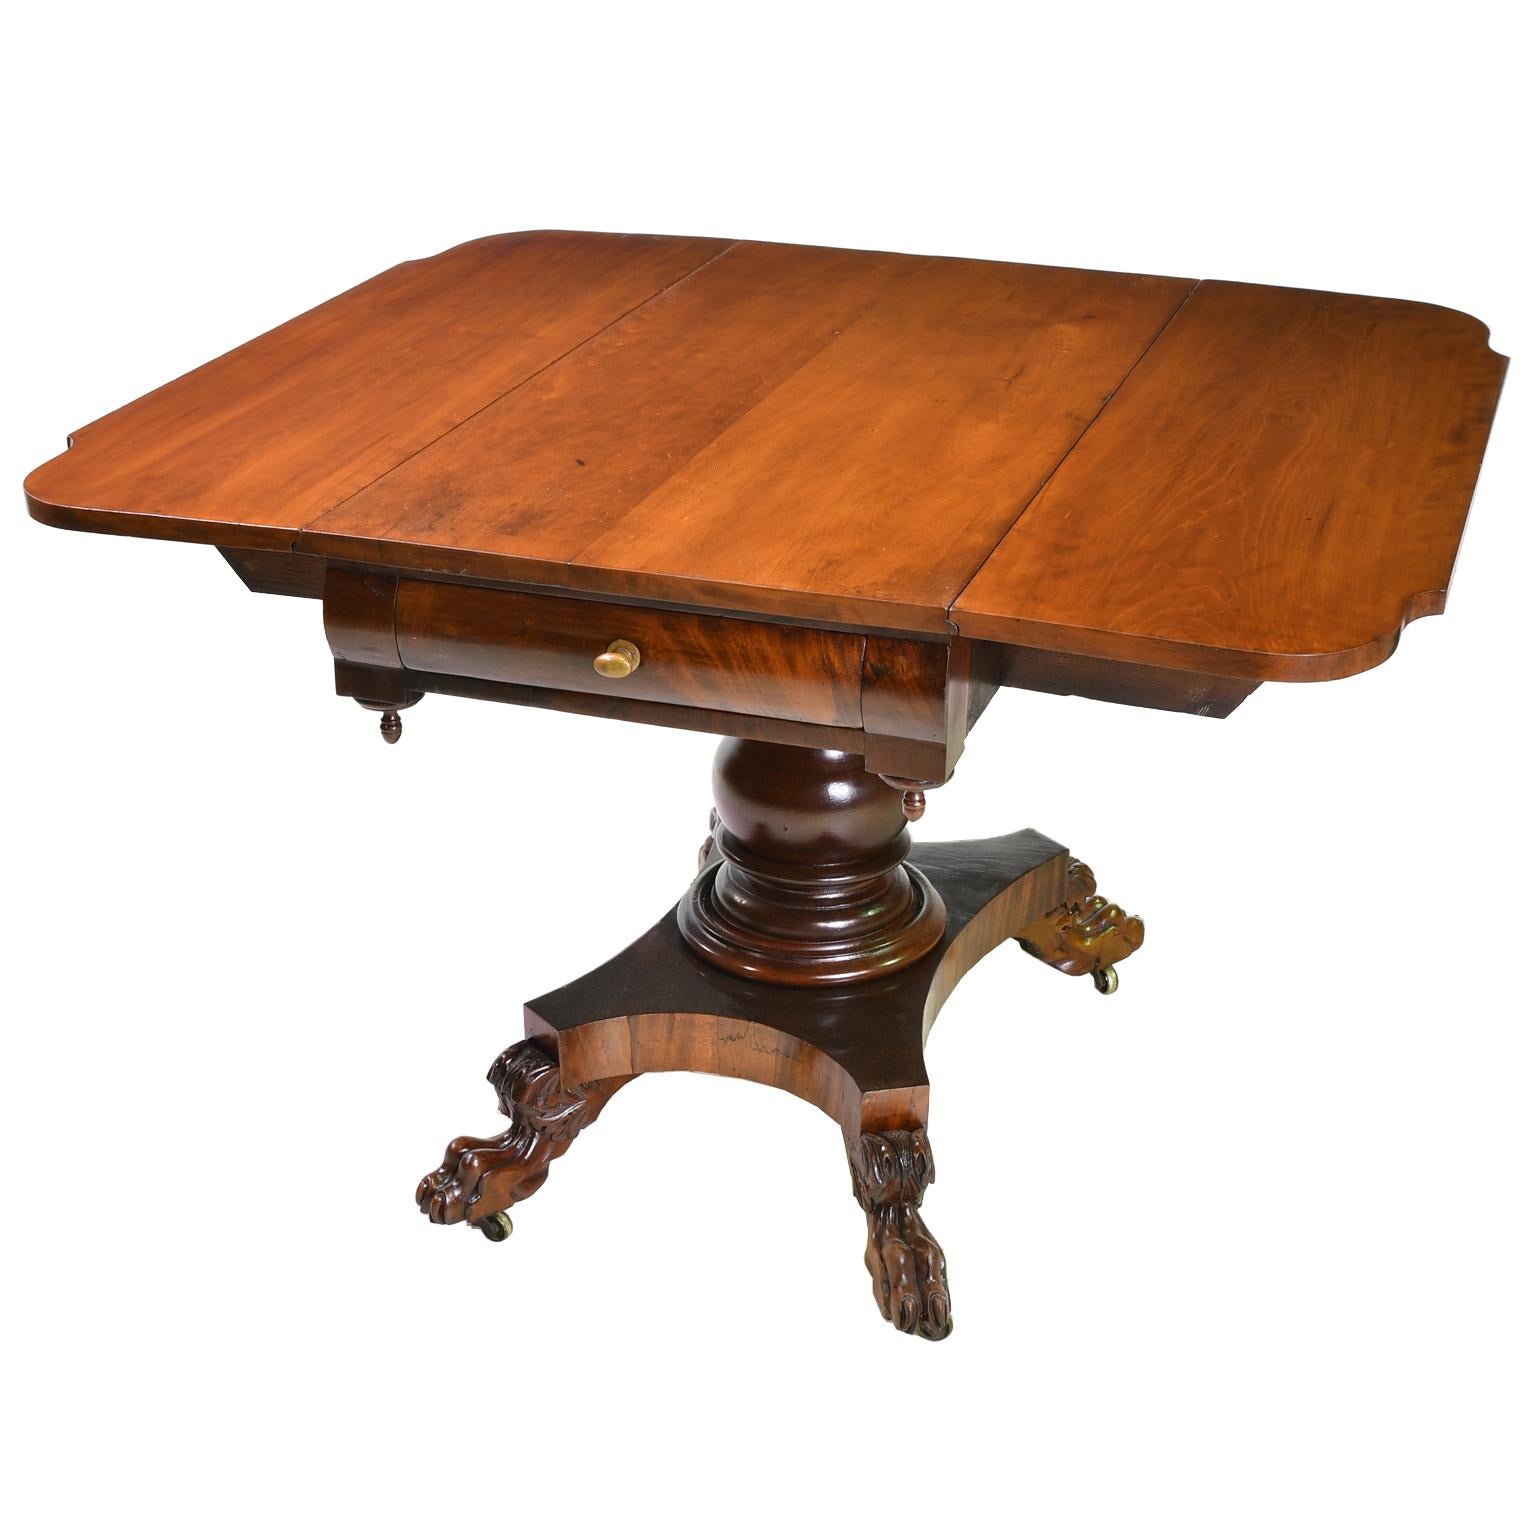 Early American Empire Drop-Leaf/ Pembroke Table in West Indies Mahogany, c. 1830 For Sale 1